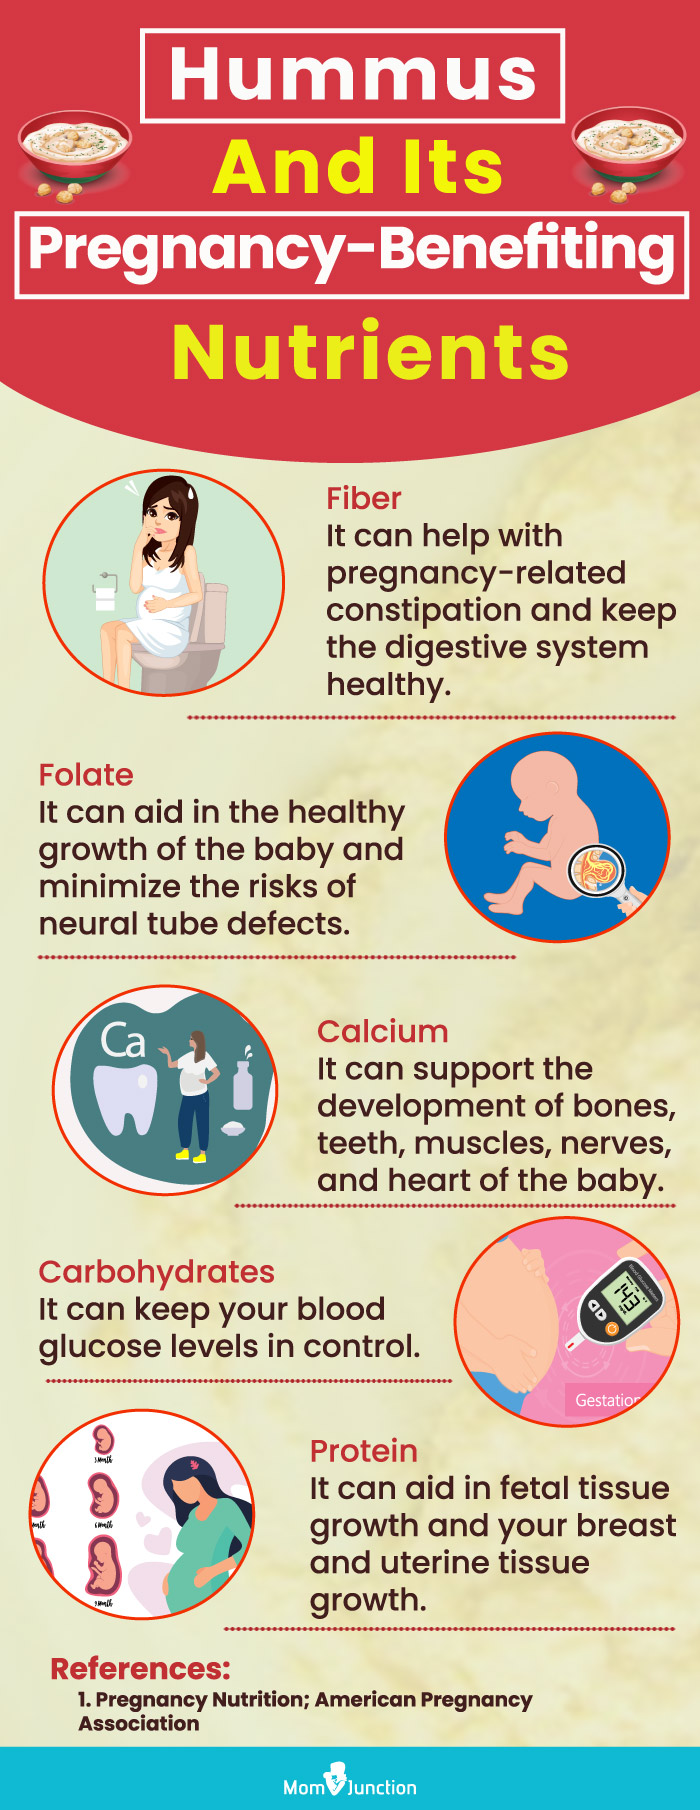 hummus and its pregnancy benefiting nutrients (infographic)